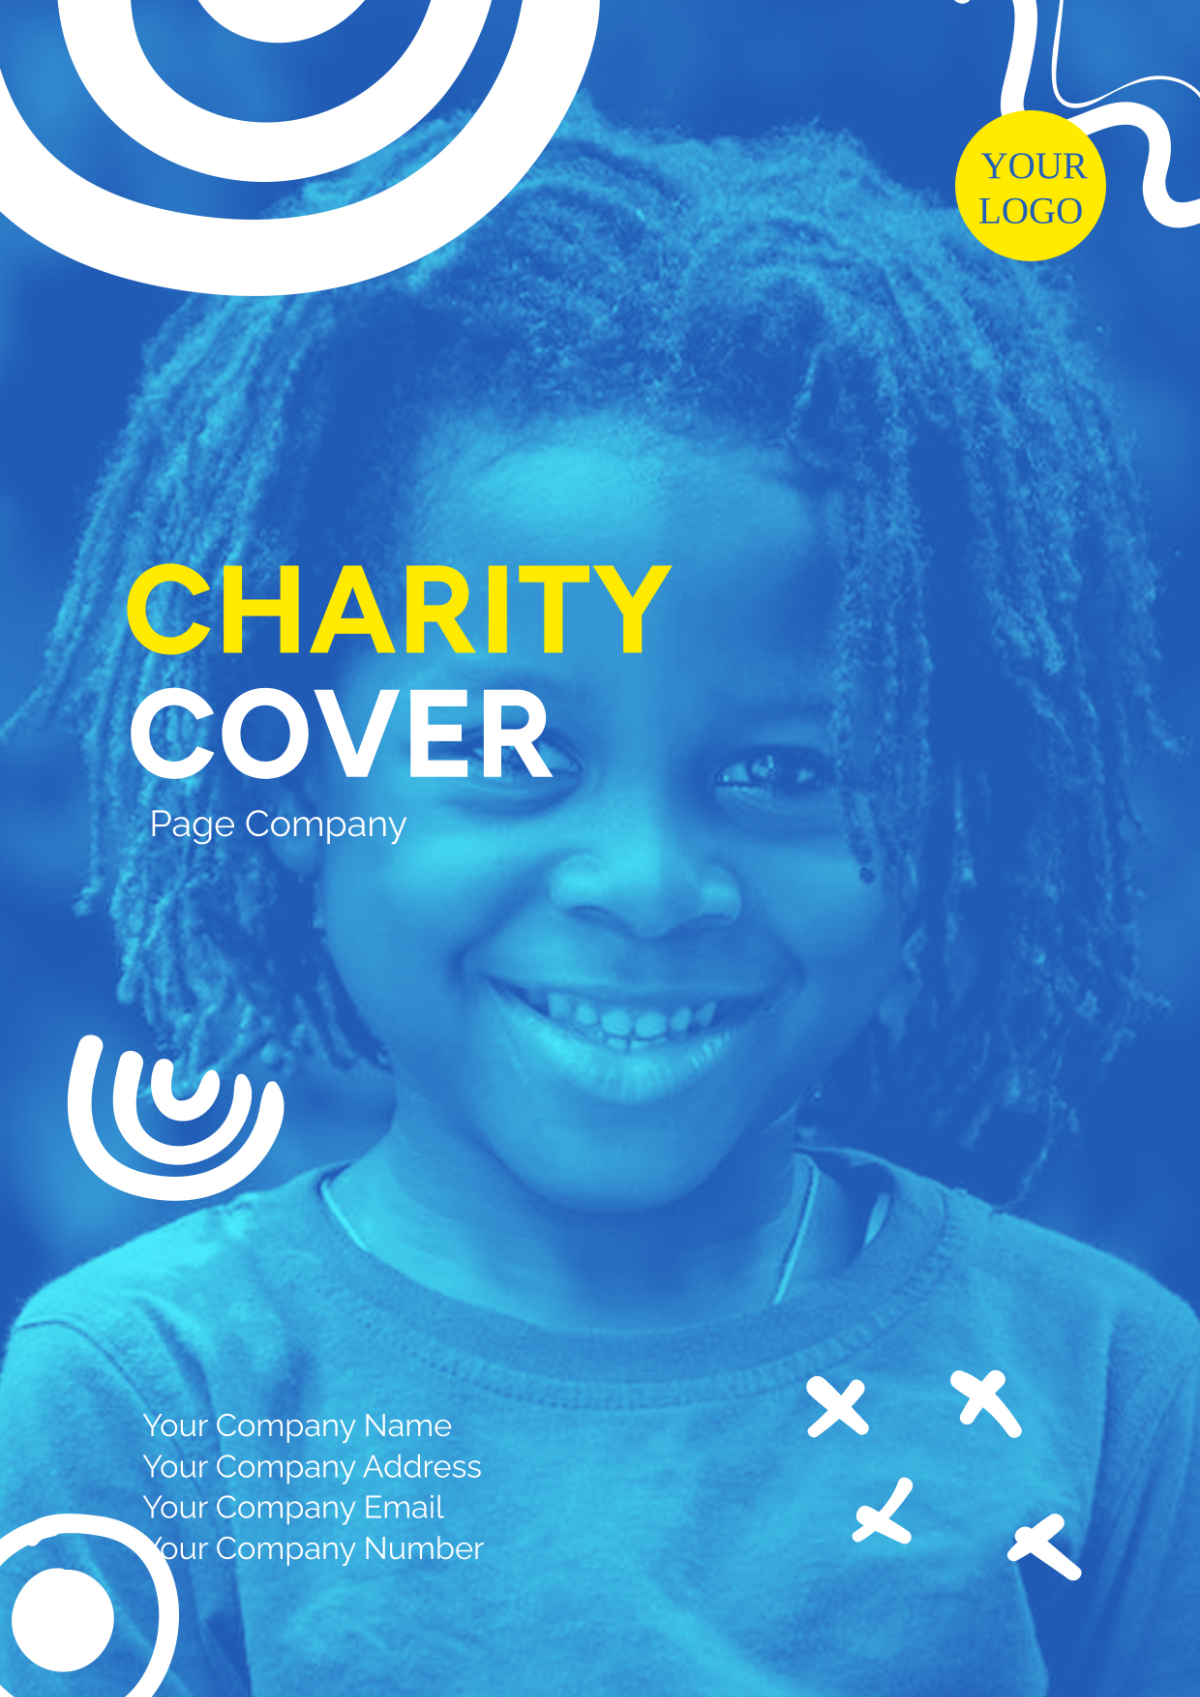 Charity Cover Page Company